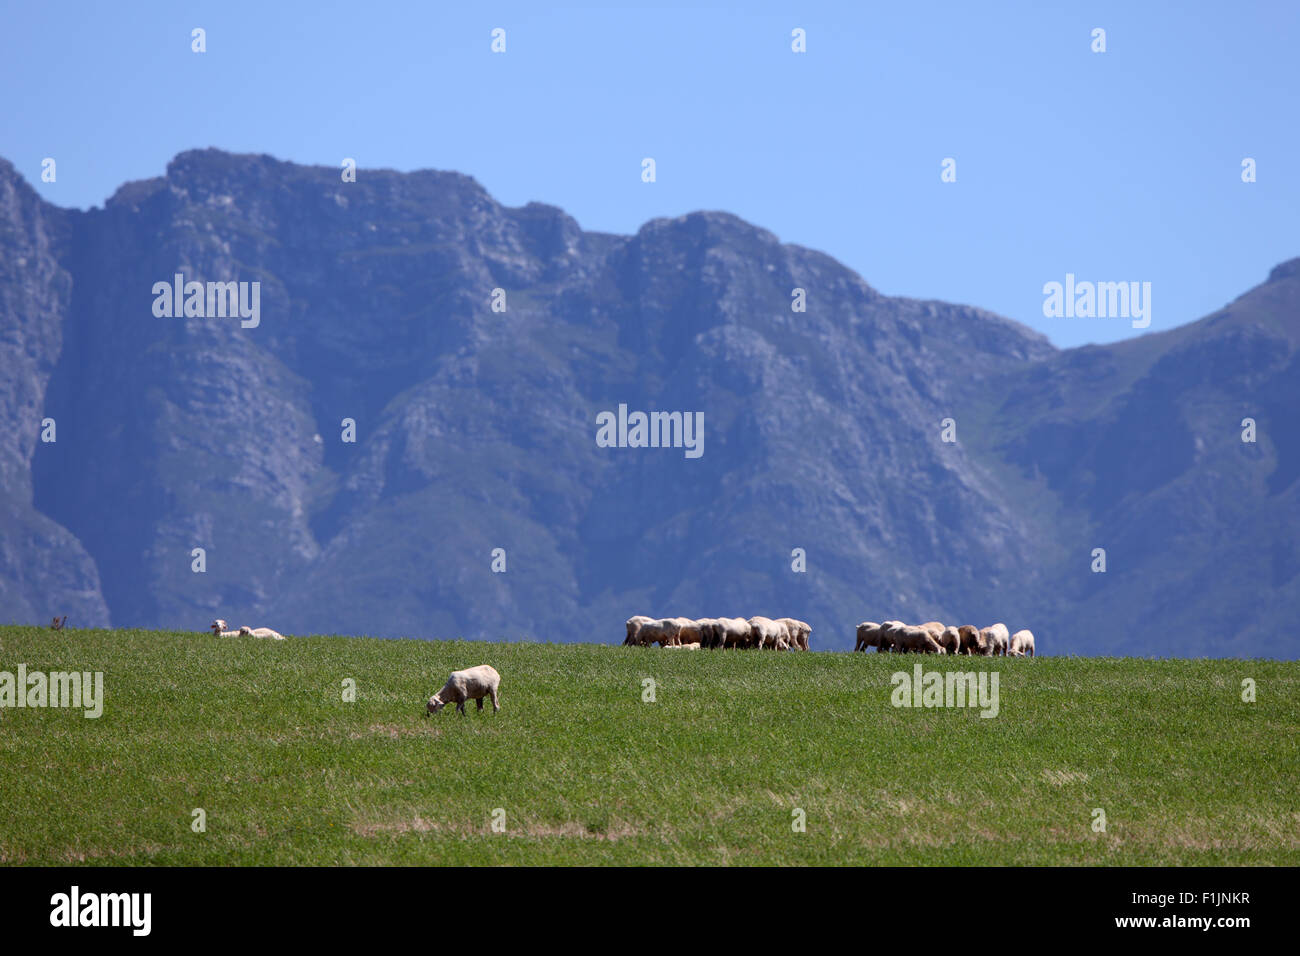 Sheep grazing in field, mountain in background Stock Photo